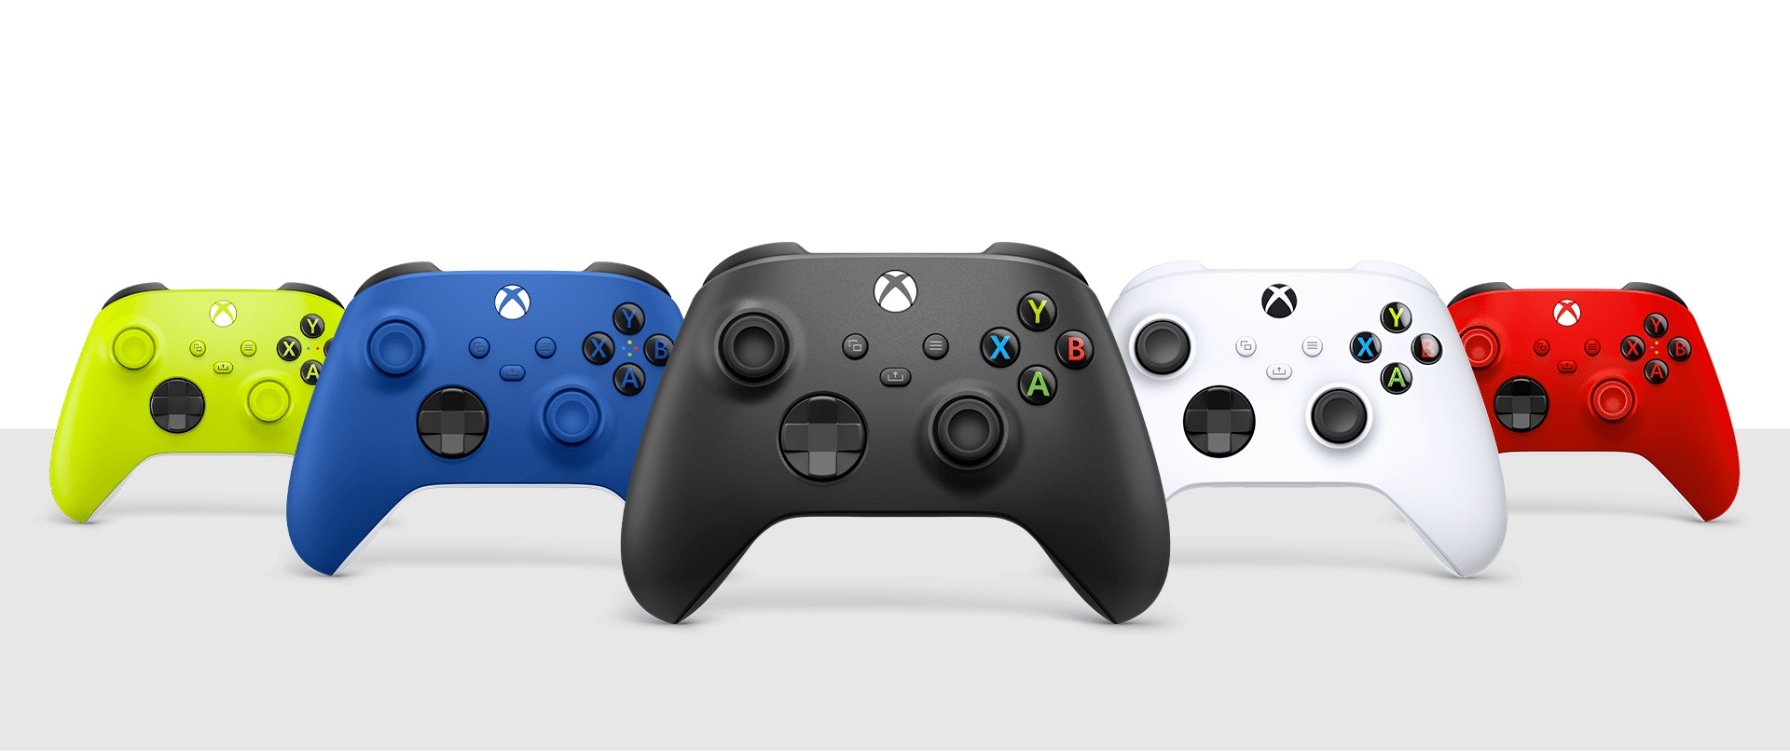 Open-Box or Used Xbox One Controllers and Accessories - Why They're a Smart Choice for Gamers - Techachi